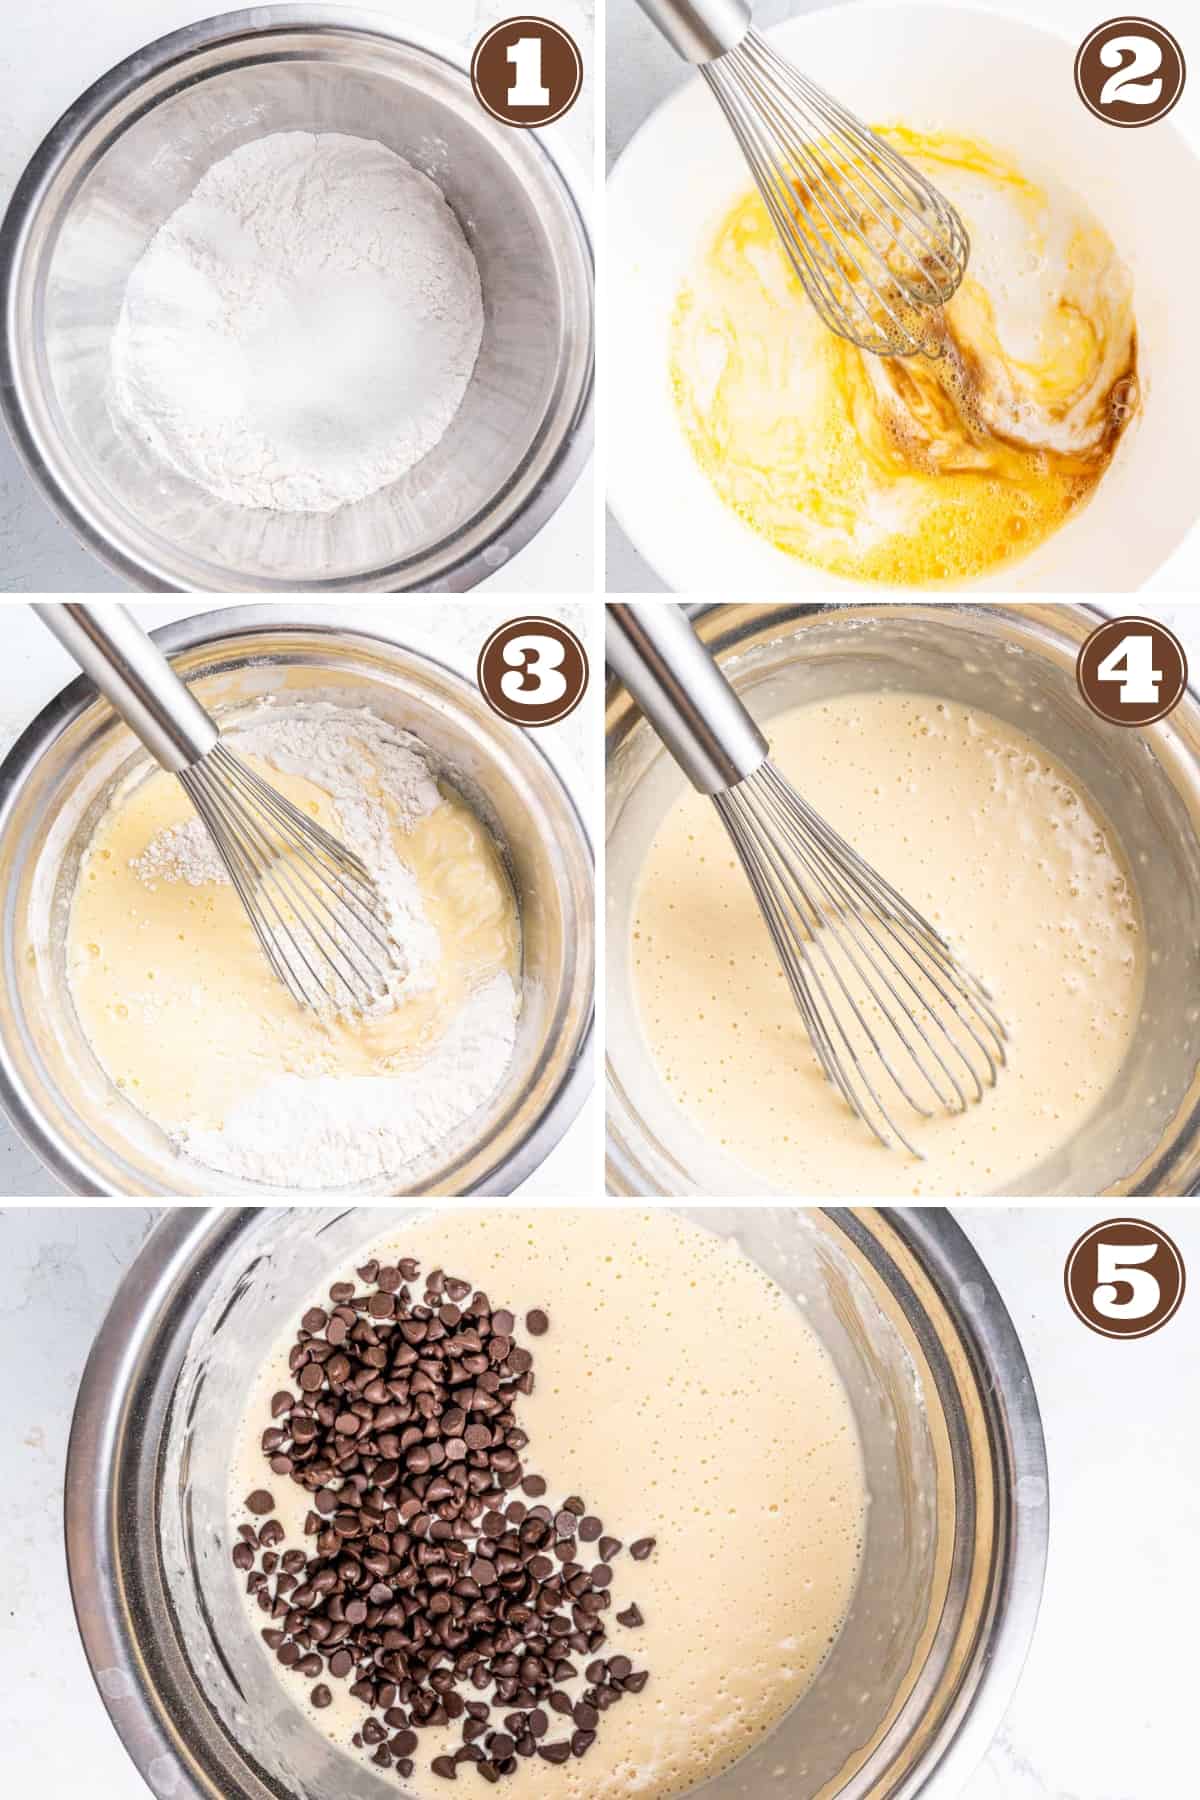 Numbered collage image showing steps to make chocolate chip pancake batter.